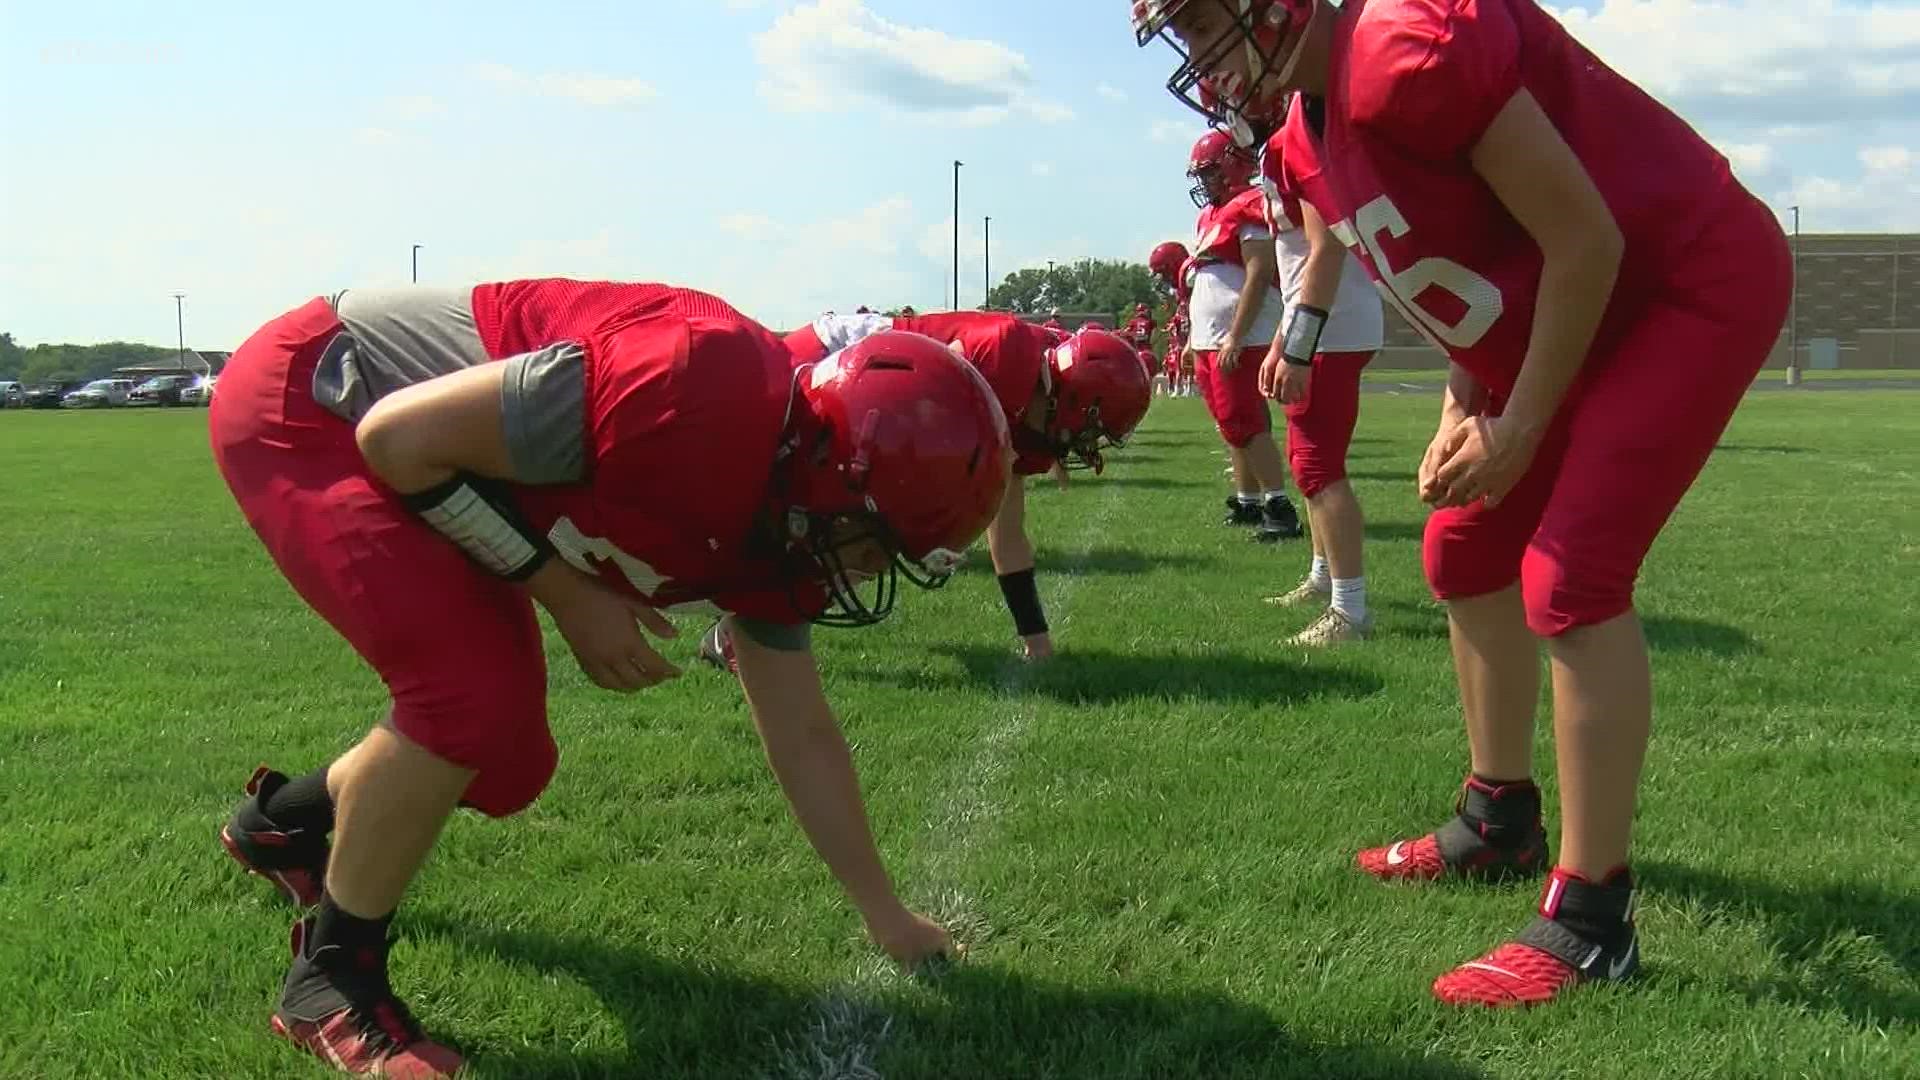 The Wauseon Indians have unfinished business in the NWOAL, with sights set on revenge after last year's loss to this year's favorite to win the league, Archbold.